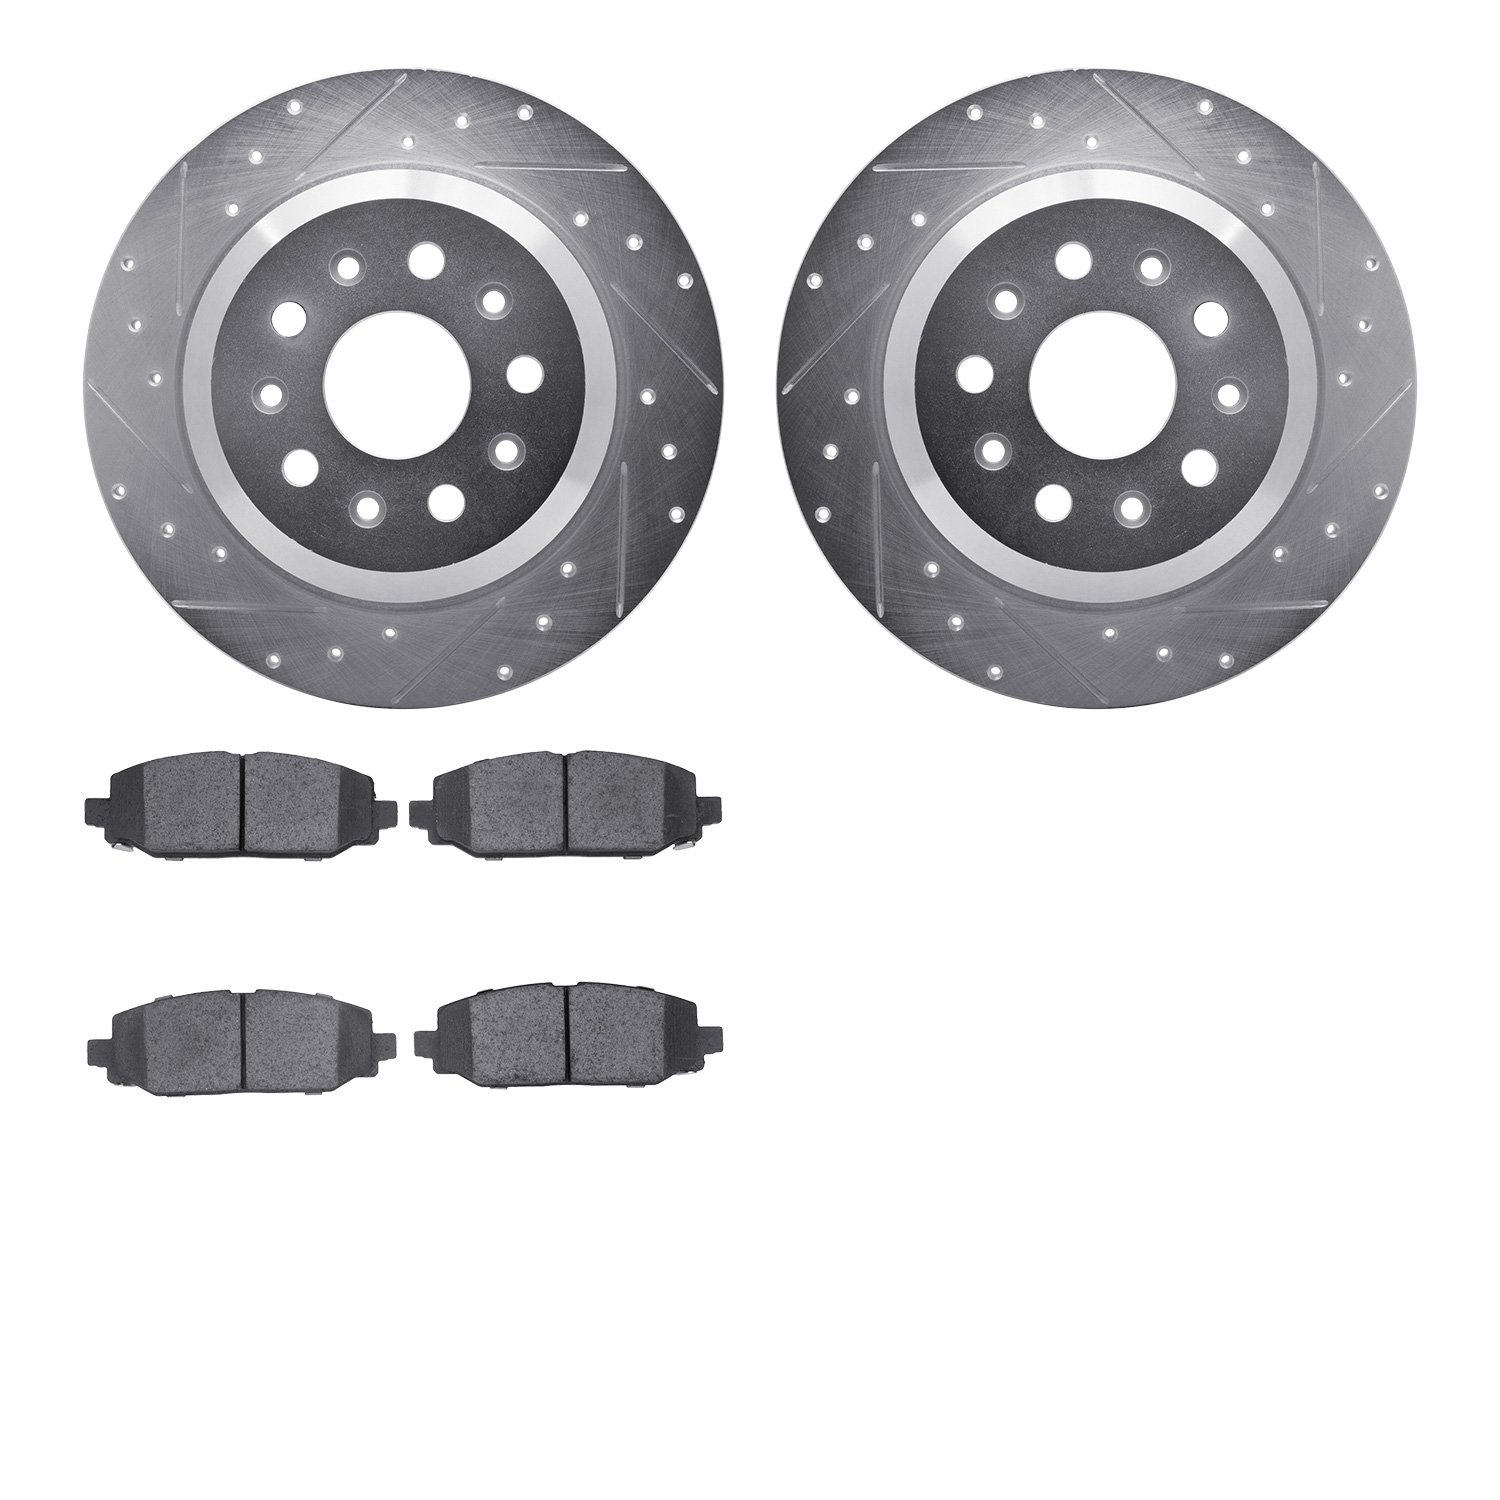 7402-42043 Drilled/Slotted Brake Rotors with Ultimate-Duty Brake Pads Kit [Silver], Fits Select Mopar, Position: Rear